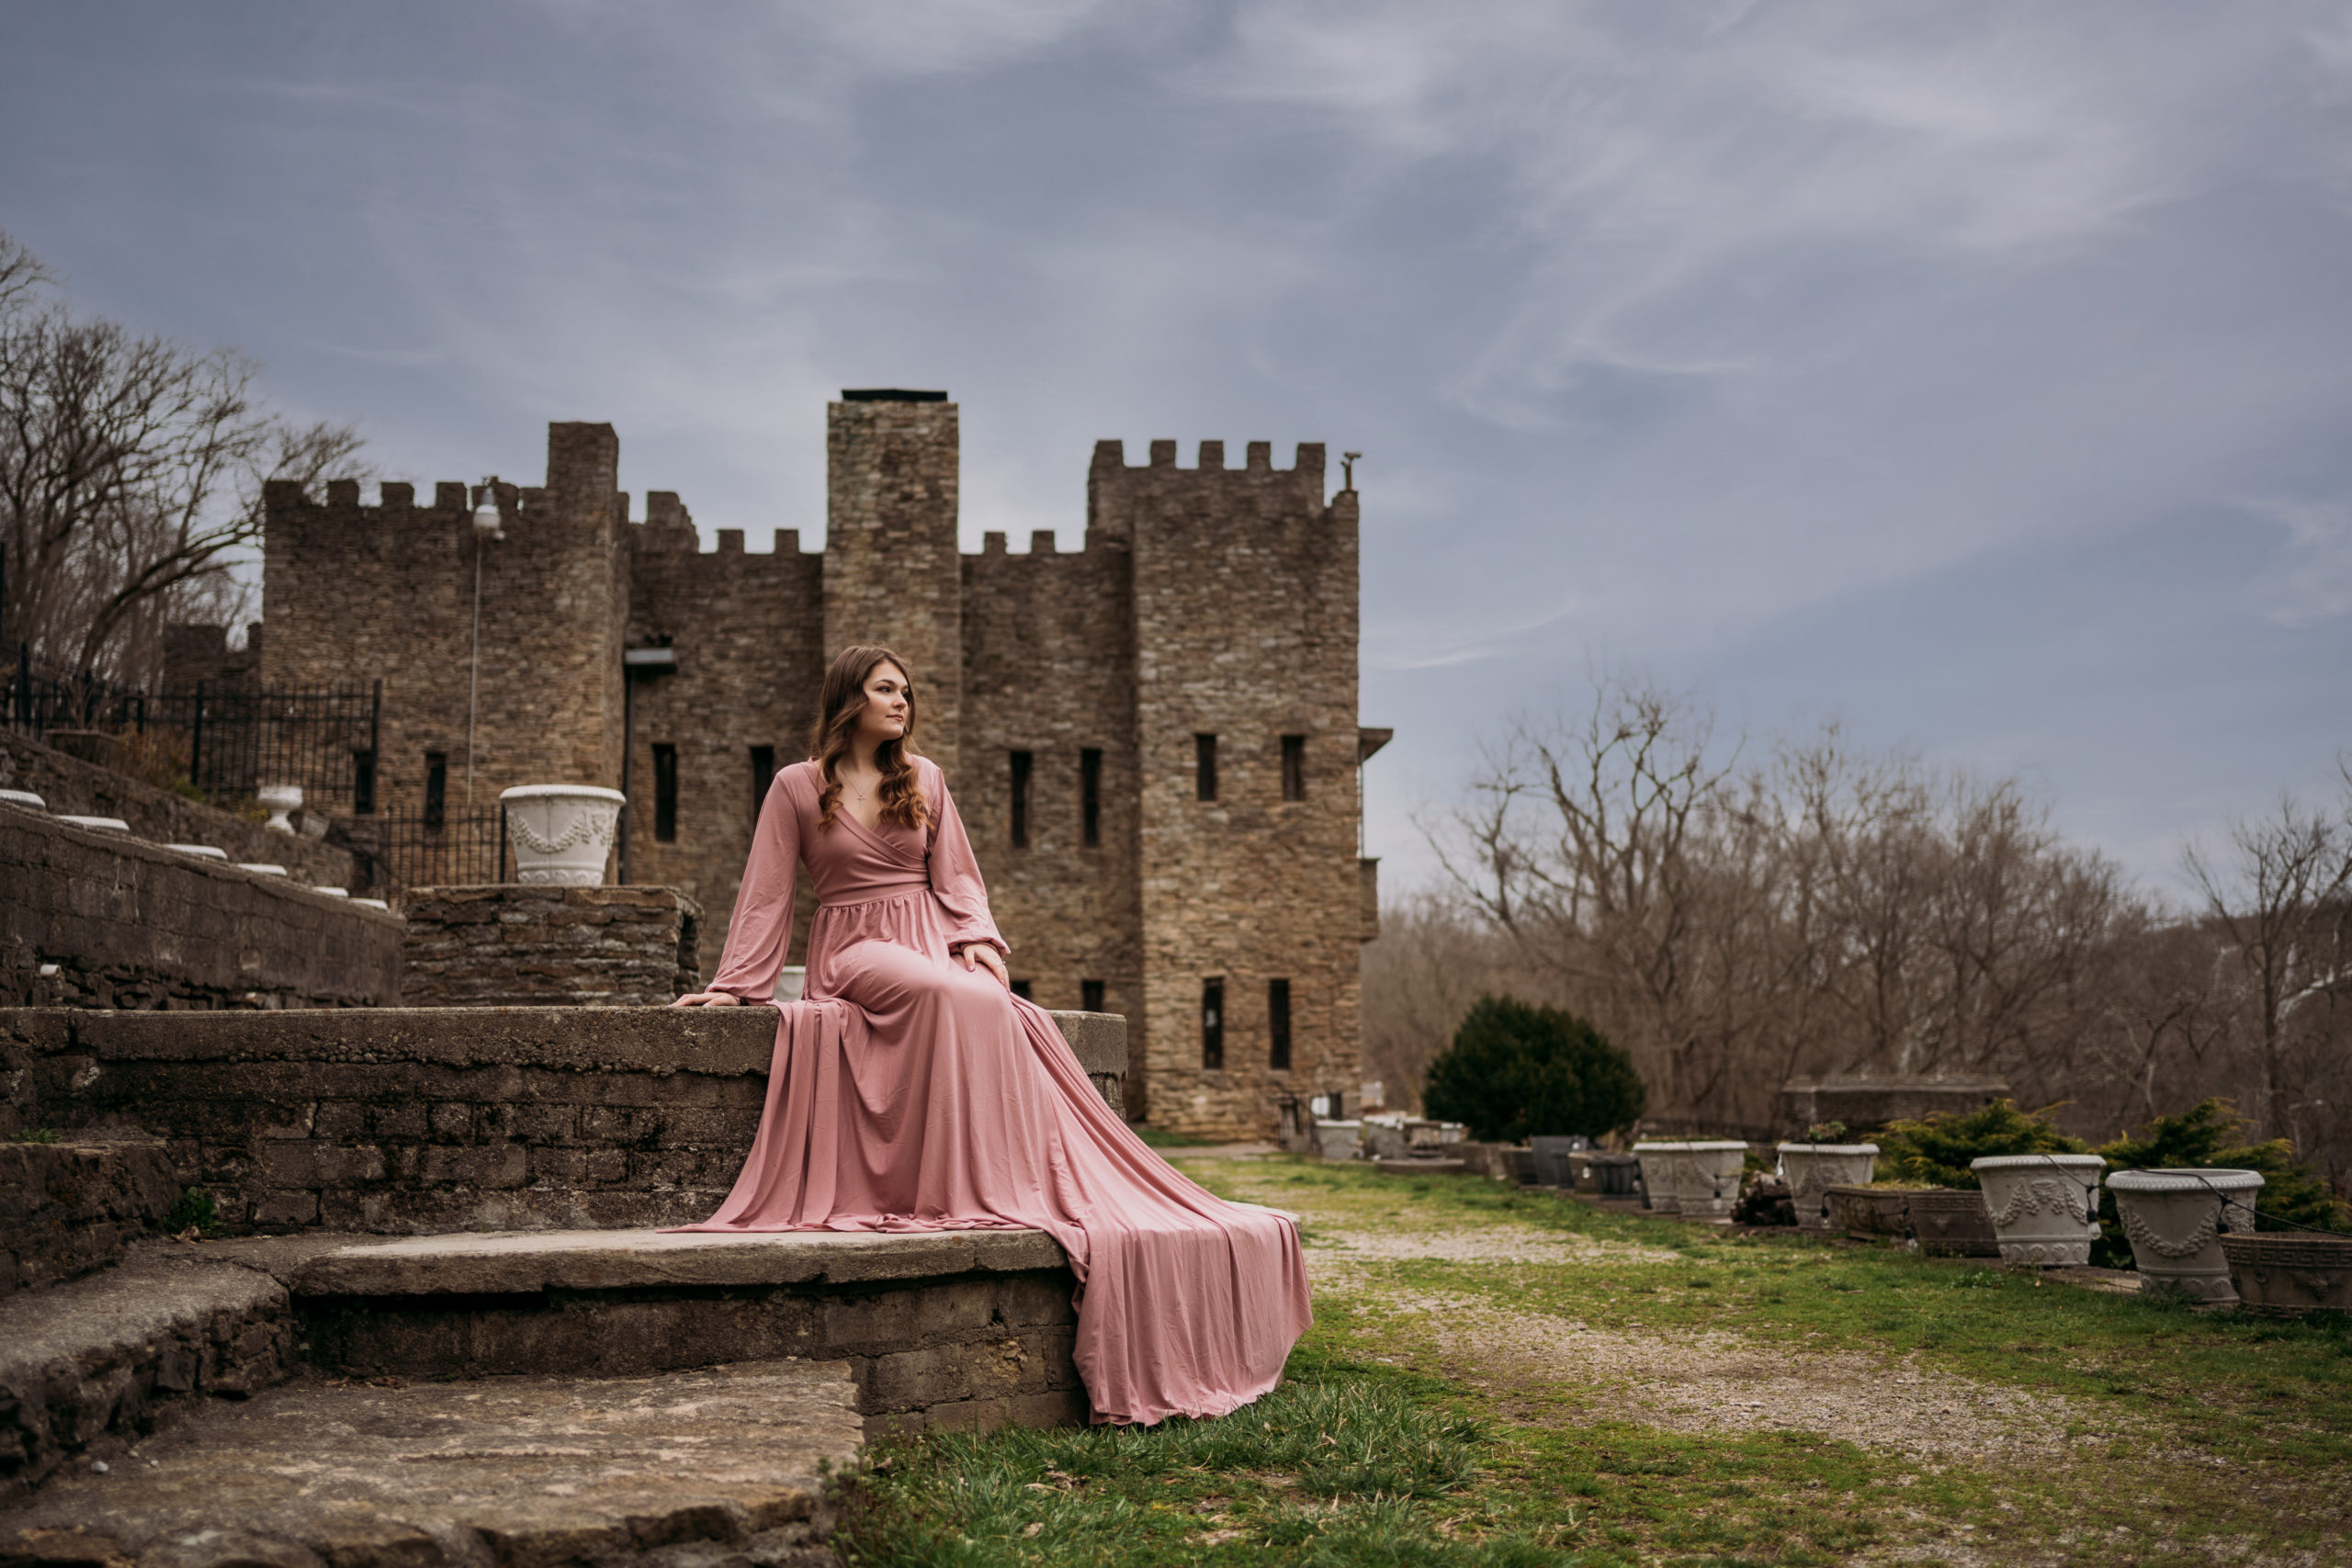 Loveland Castle Senior Session. Flowy dusty rose gown in the gardens. Sitting on stone steps with castle in background